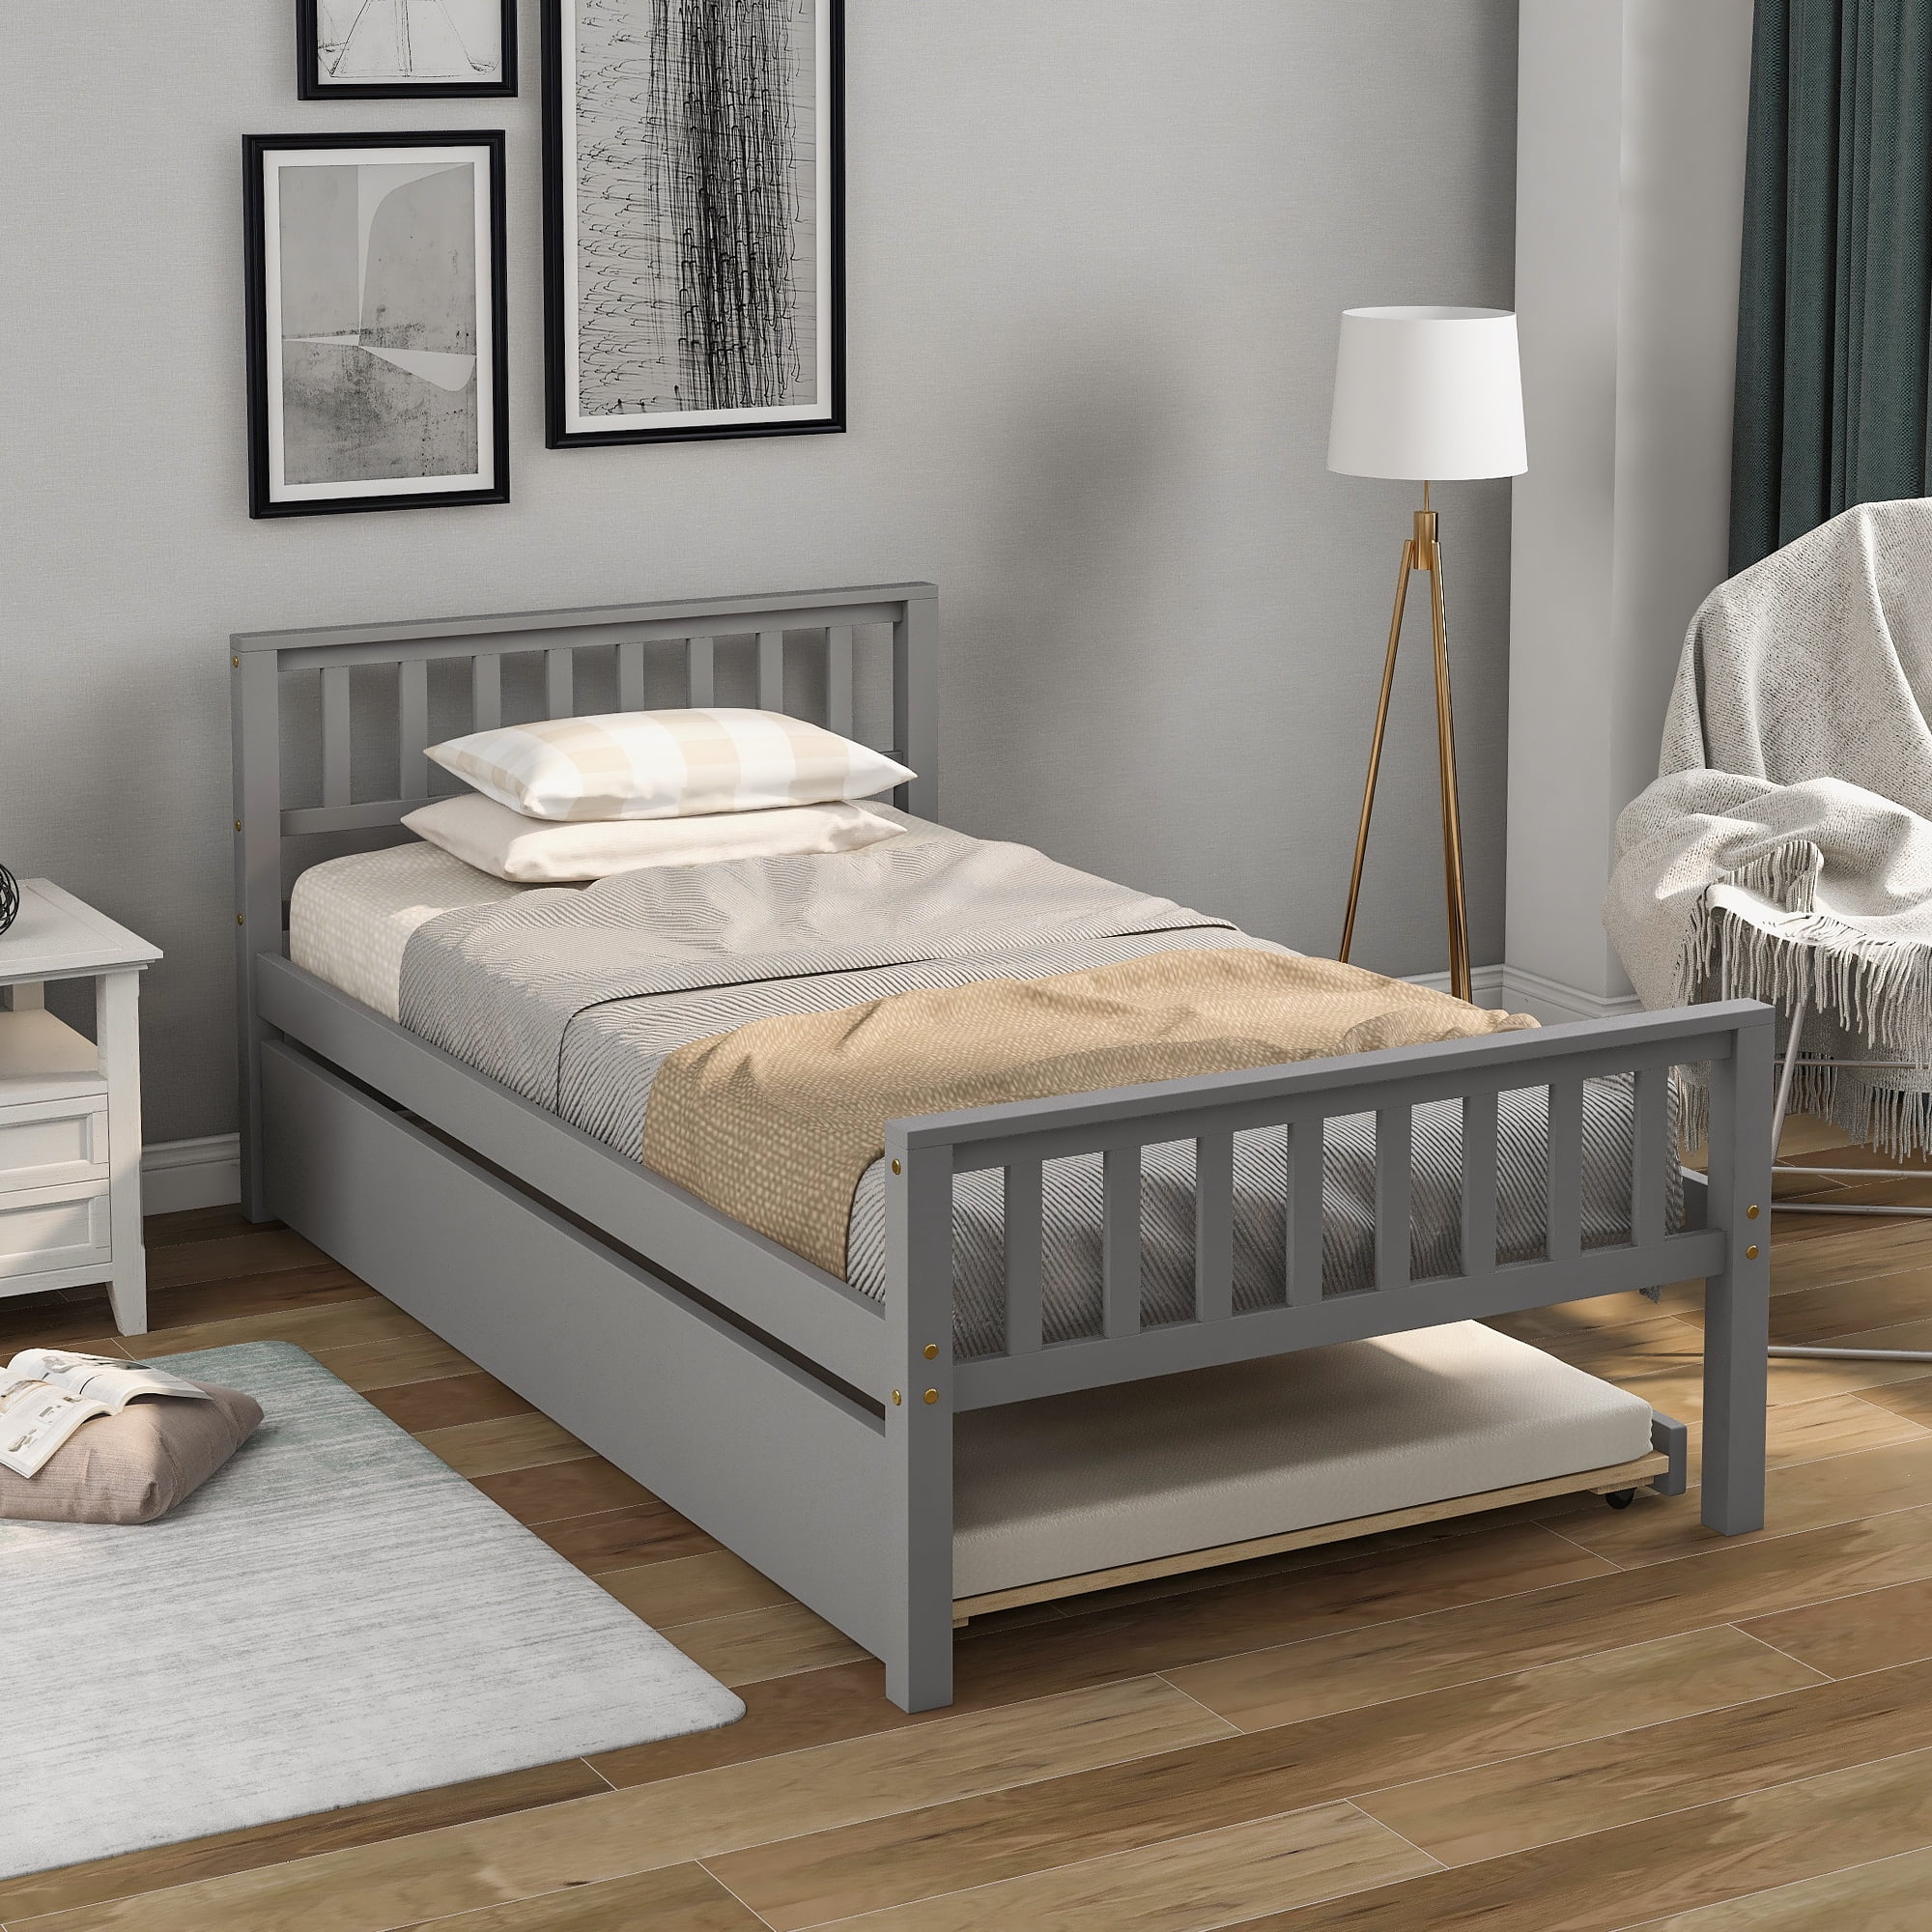 NEW Grey Wooden Bedroom Furniture Single Bed Frame With Guest Pull Out Trundle 